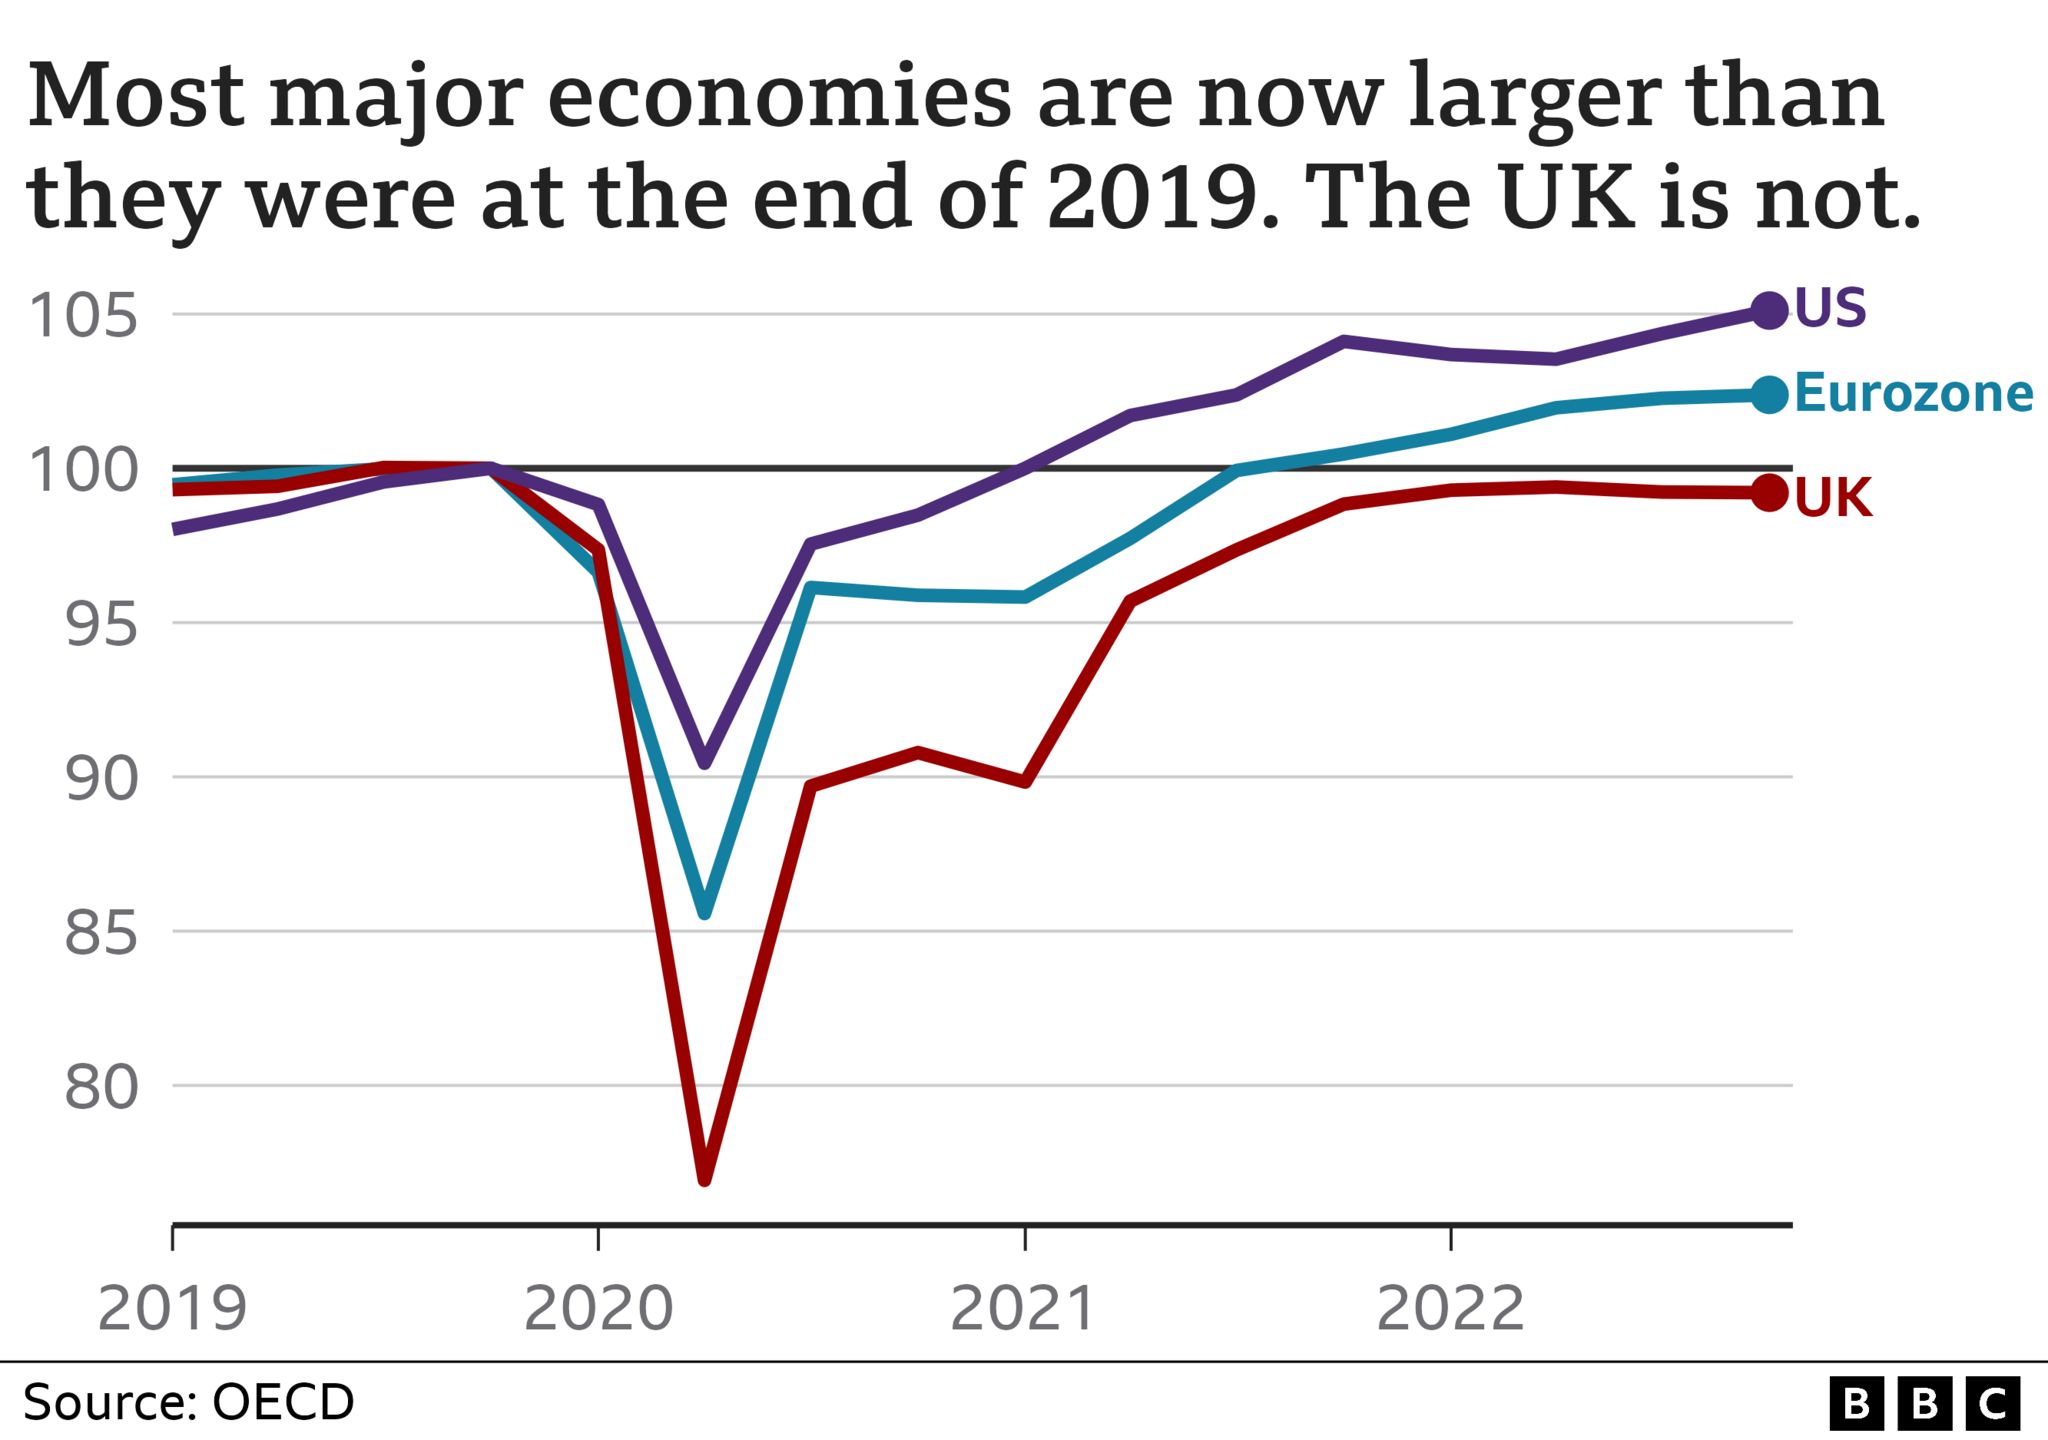 Chart showing the UK economy failing to recover as strongly as others after the pandemic